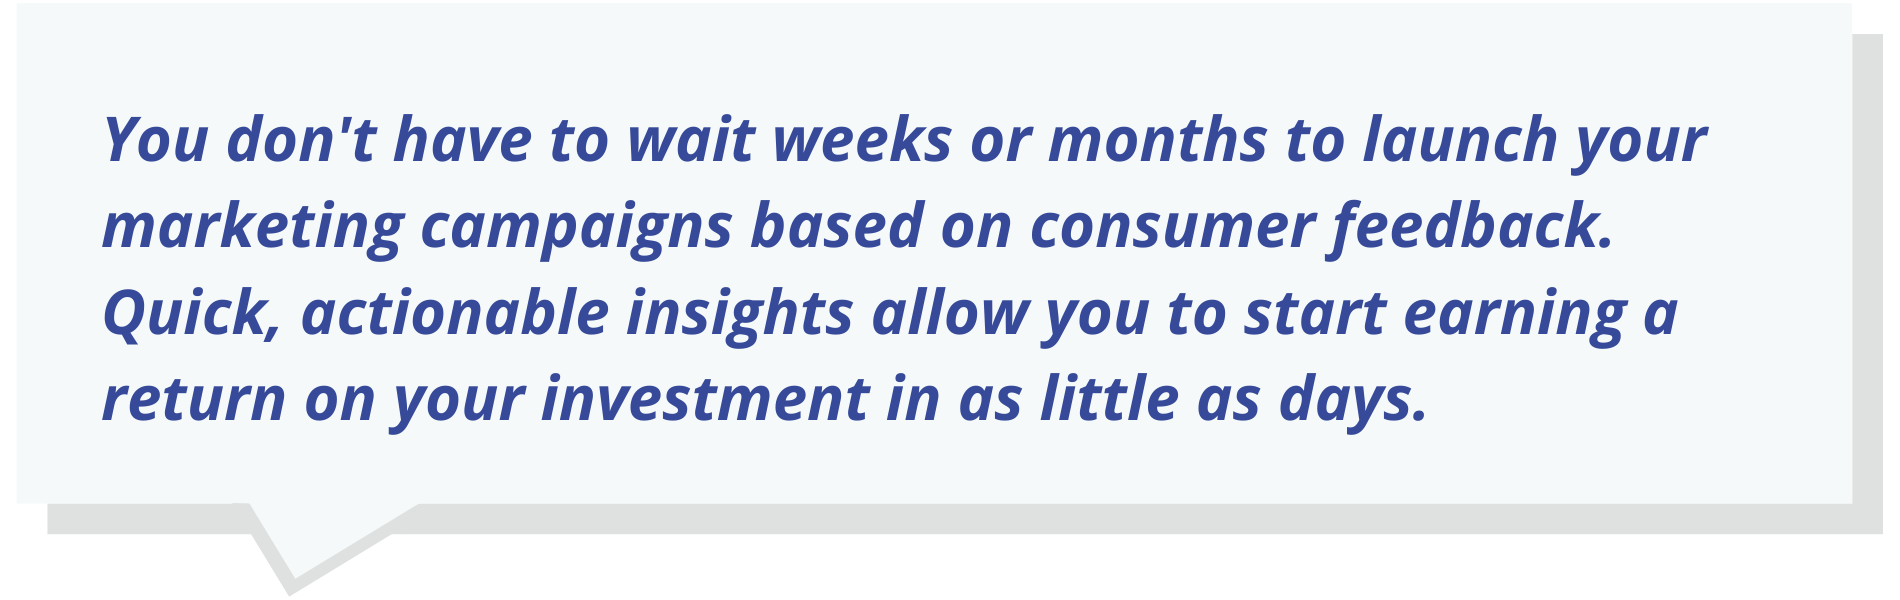 You don't have to wait weeks or months to launch your marketing campaigns based on consumer feedback. Quick, actionable insights allow you to start earning a return on your investment in as little as days.